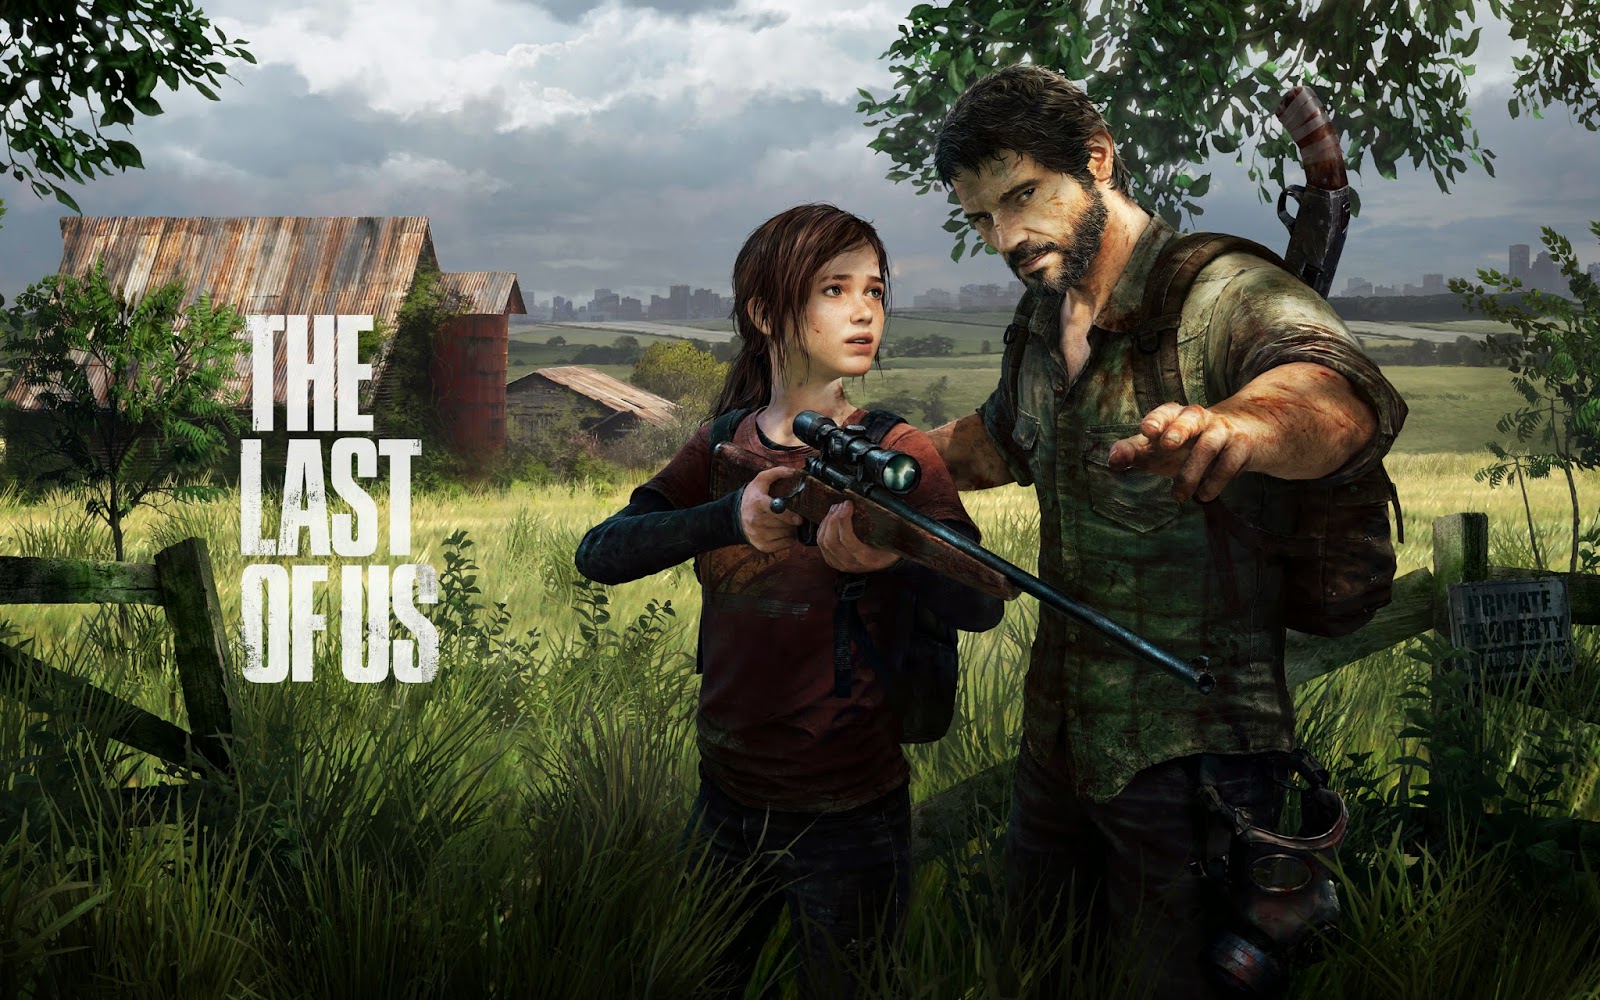 Geek insider, geekinsider, geekinsider. Com,, the last of us - game review, gaming